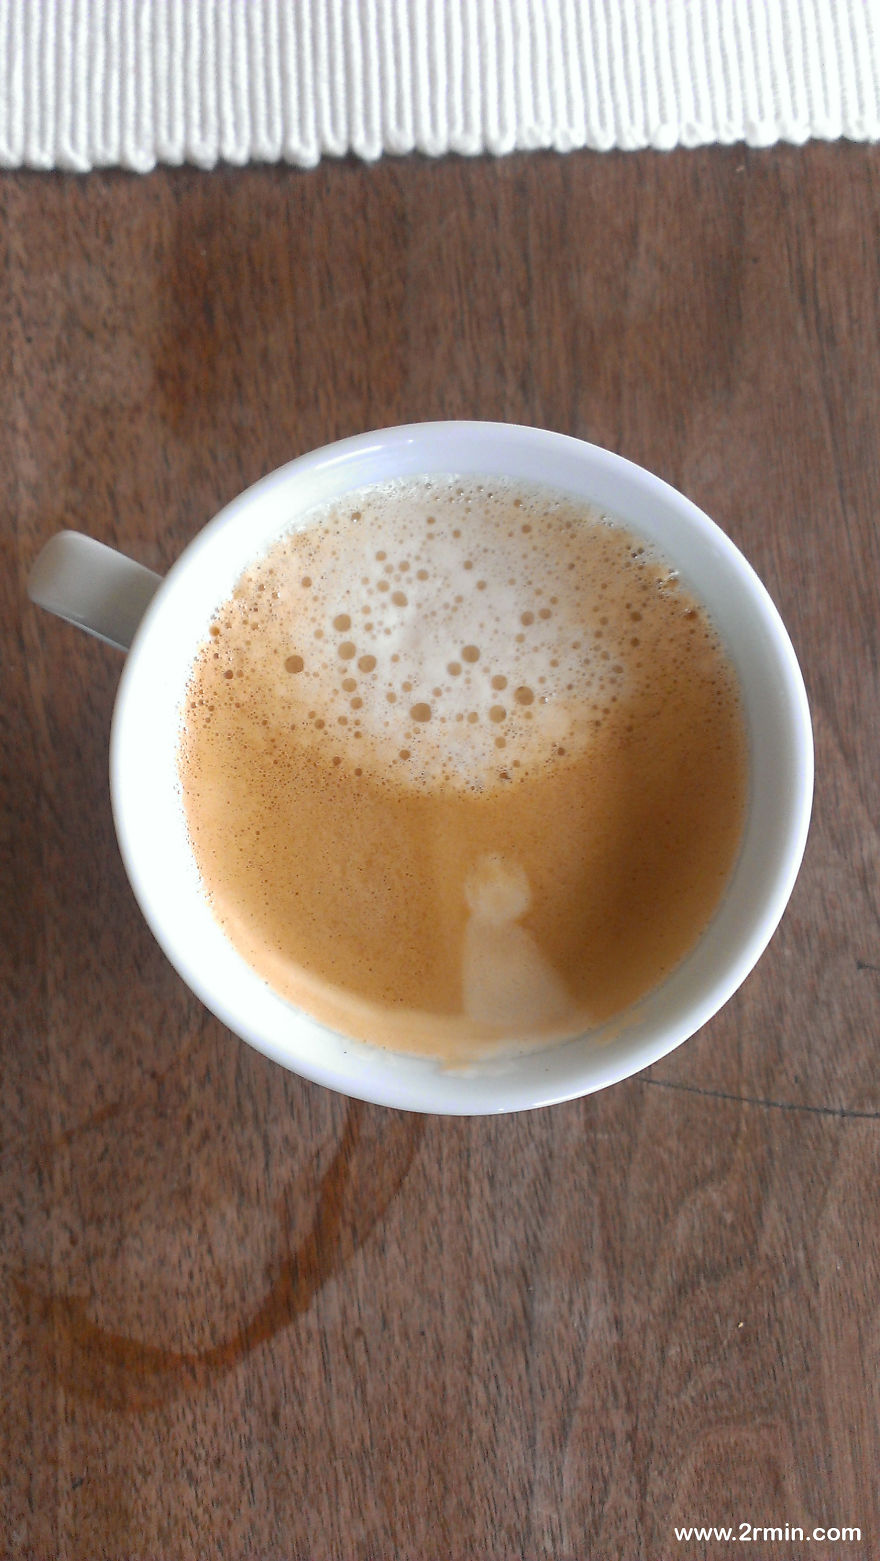 10+ What Have You Found In Your Coffee This Morning?